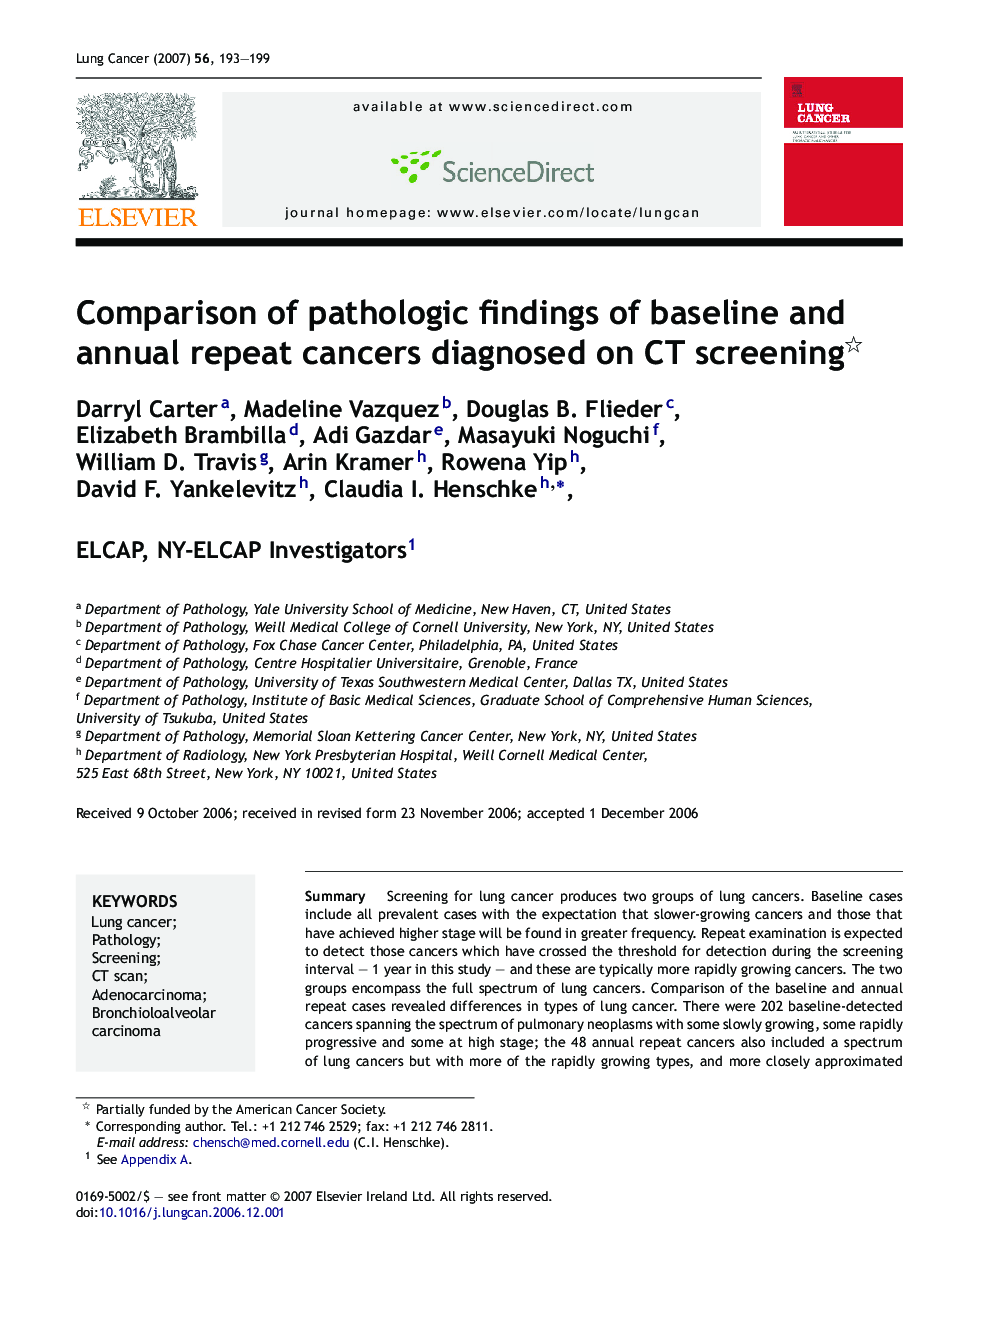 Comparison of pathologic findings of baseline and annual repeat cancers diagnosed on CT screening 